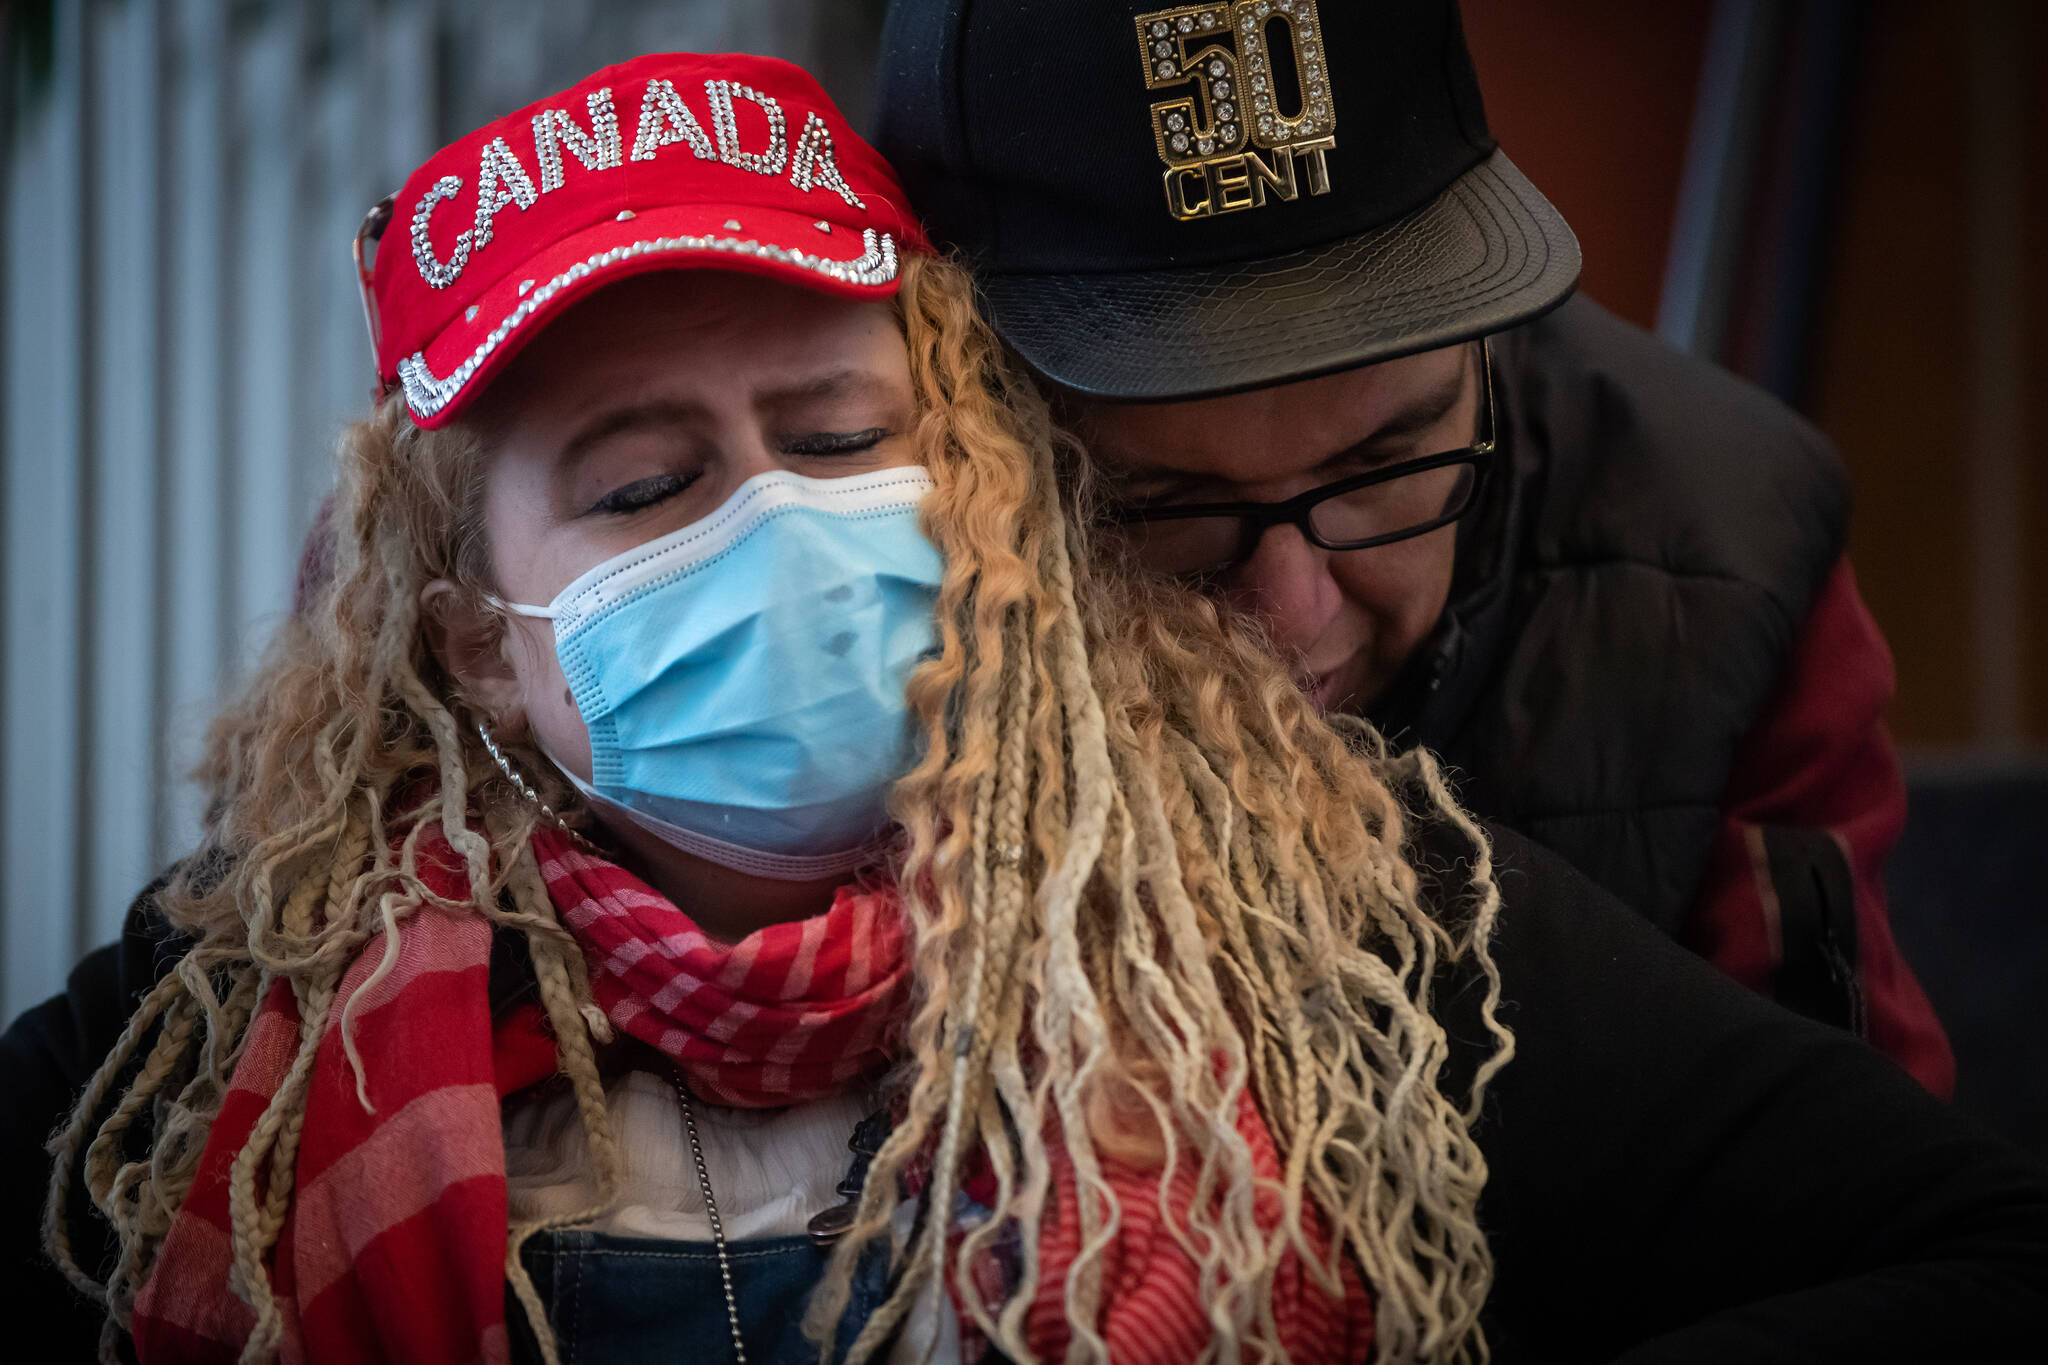 Curtis Traverse, right, comforts his girlfriend Hope as they listen to speeches in memory of those who died from a suspected illicit drug overdose, in Vancouver, on Wednesday, February 9, 2022. The B.C. Coroners Service announced that 2,224 people died from a suspected illicit drug overdose in 2021. The Drug User Liberation Front (DULF), Vancouver Area Network of Drug Users (VANDU) and B.C. Association of People on Opiate Maintenance distributed a tested supply of illicit drugs to users after the gathering in a call for a safer drug supply. THE CANADIAN PRESS/Darryl Dyck